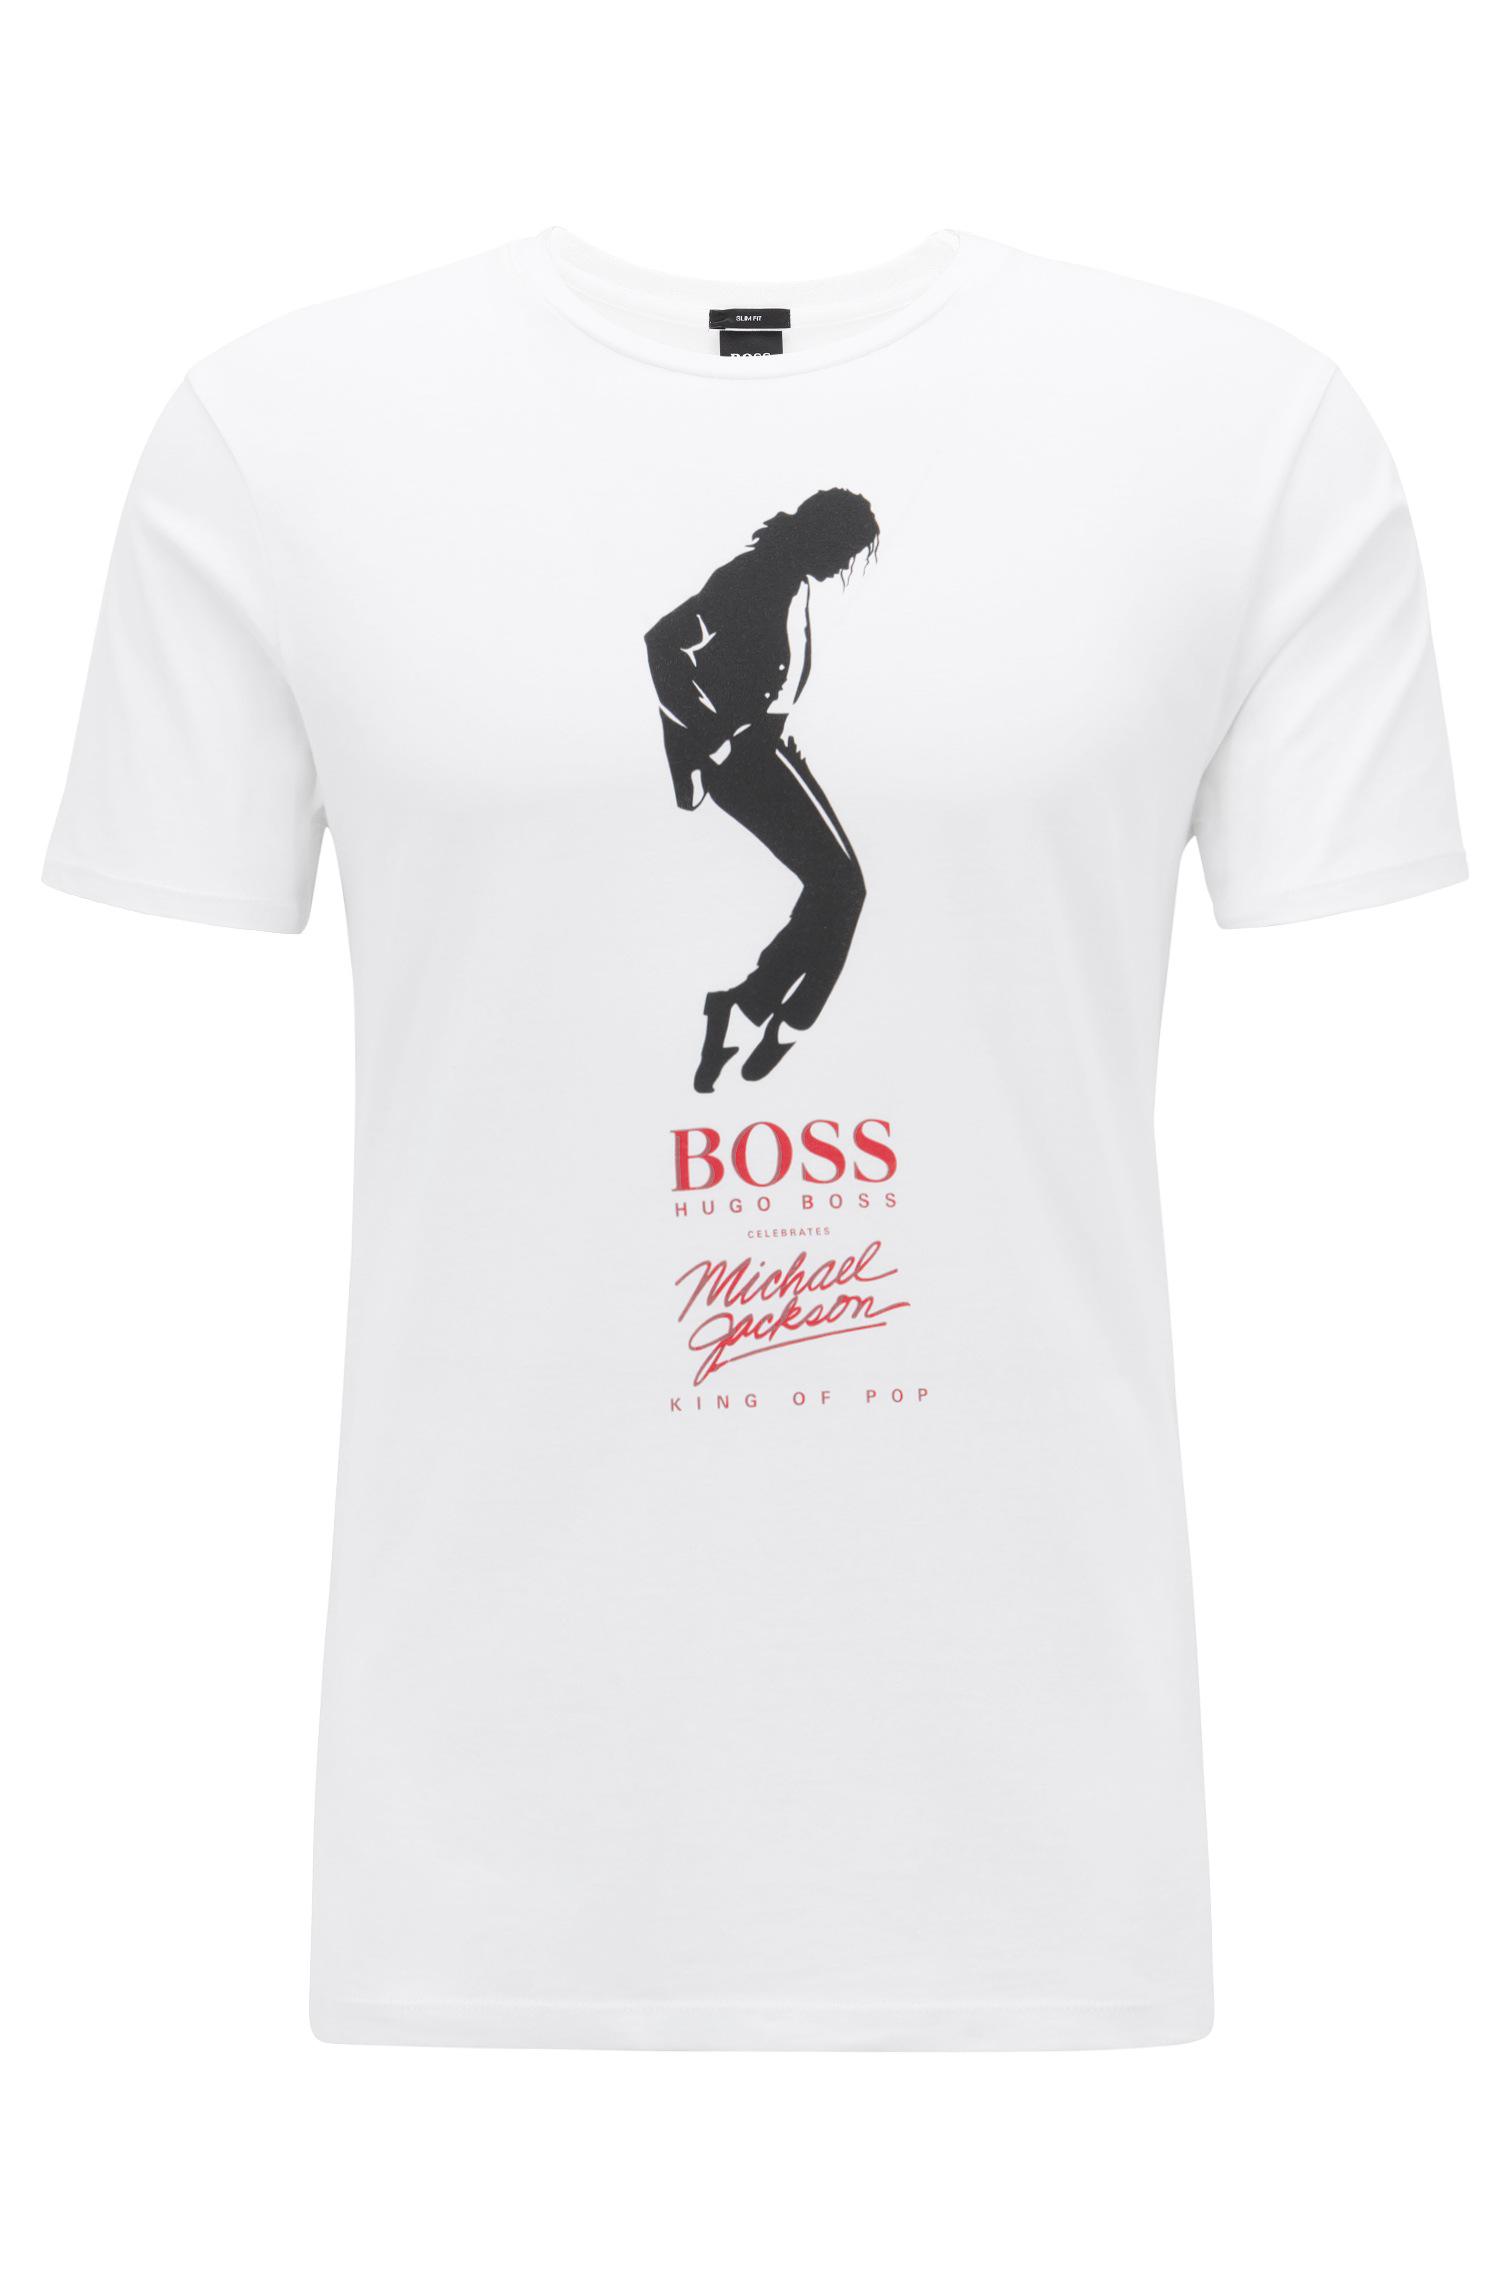 BOSS Unisex Cotton T-shirt With Michael Jackson Dance Pose Print in White for Men - Lyst